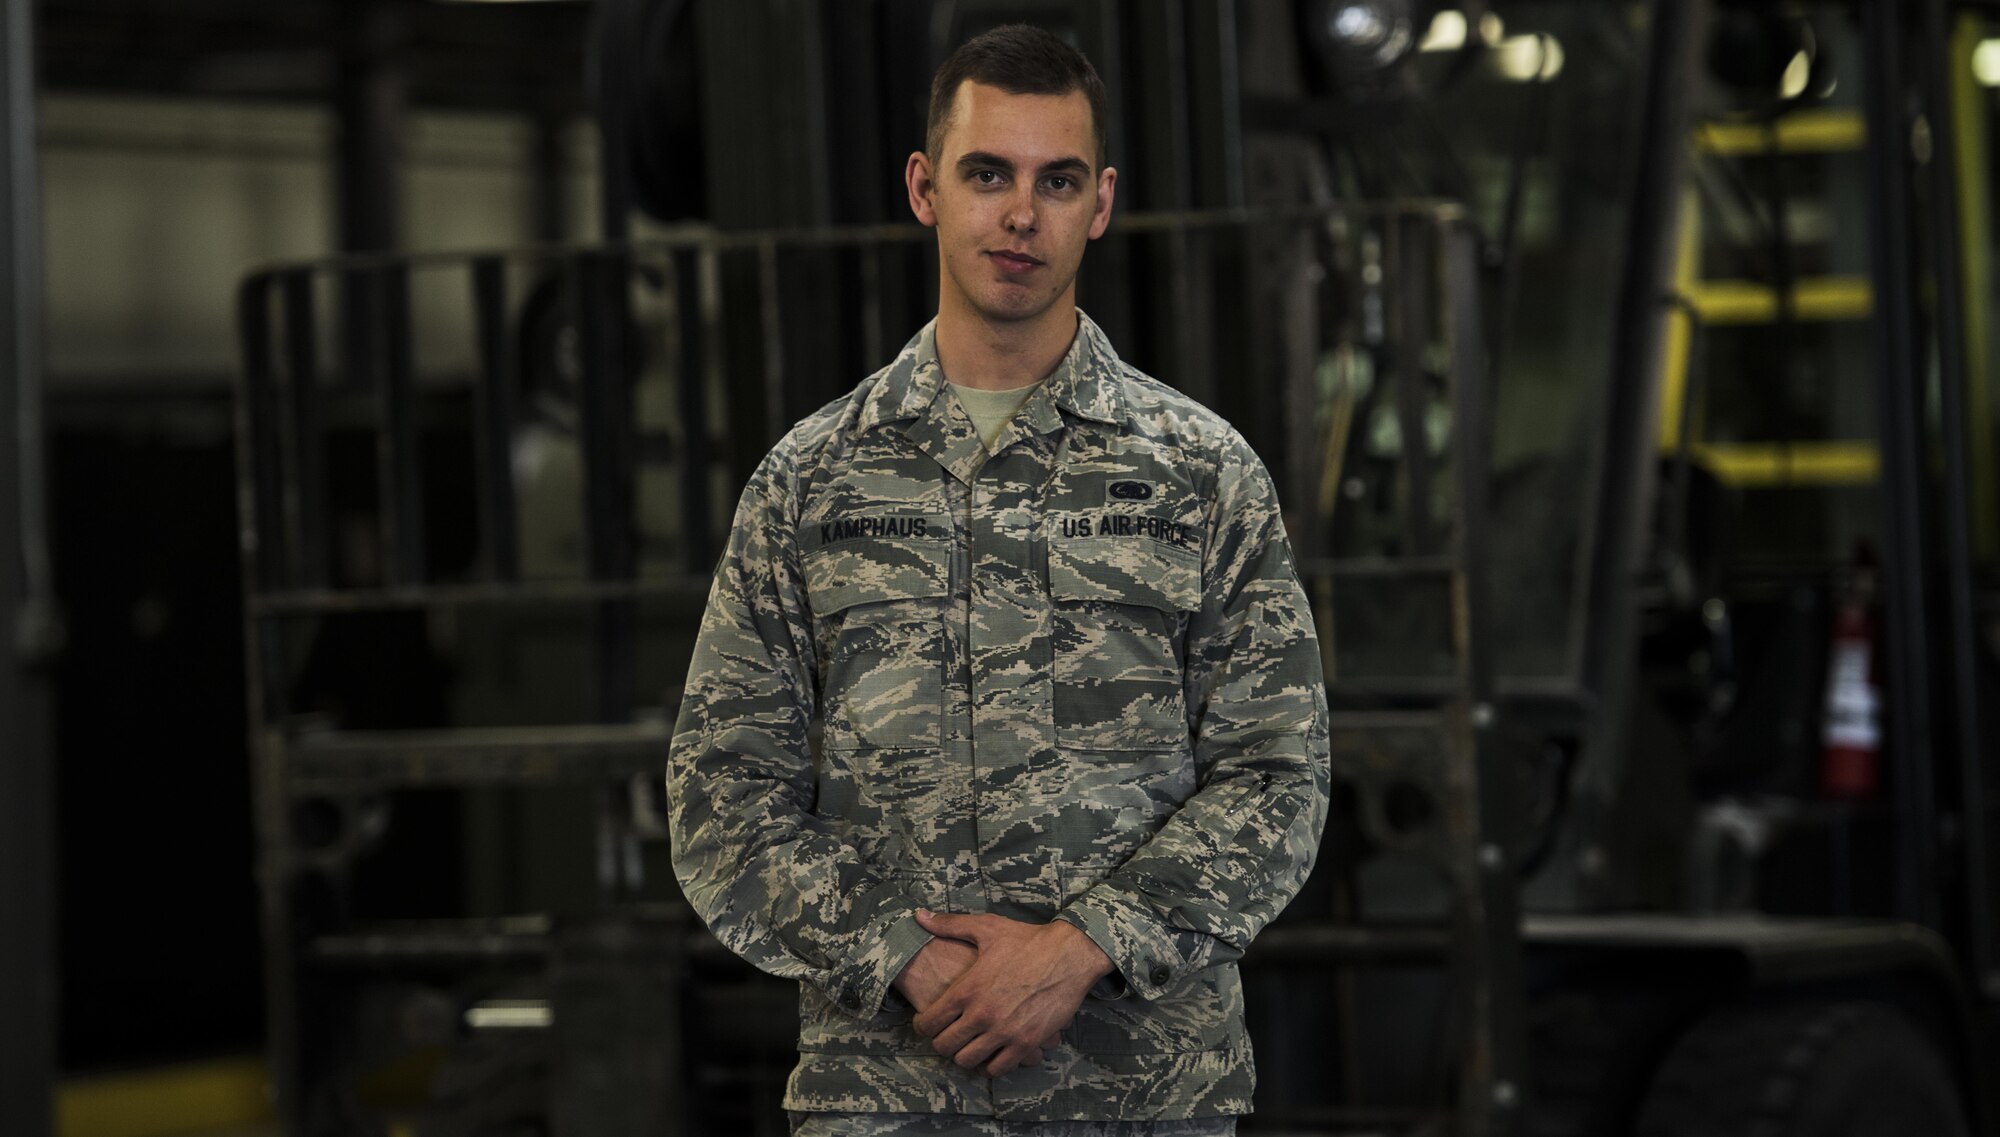 Senior Airman Brian Kamphaus, a 92nd Logistics Readiness Squadron material management journeyman, joined the military following in the footsteps of his father and grandfather and has been serving in the Air Force for more than three years, making the most of every possible minute. (U.S. Air Force photo/Senior Airman Sean Campbell)